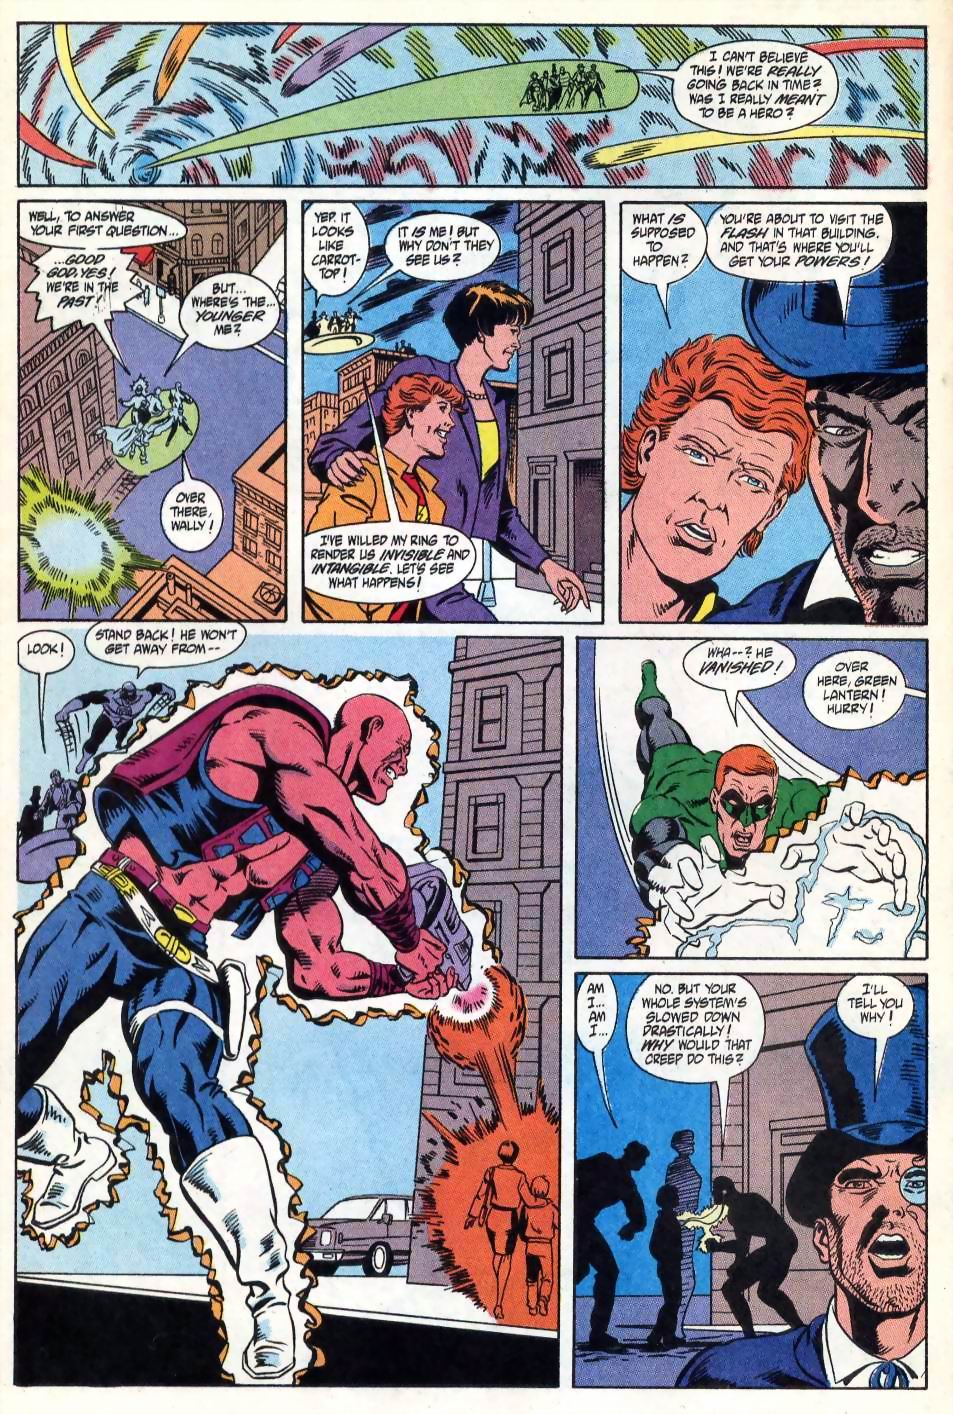 Justice League International (1993) 59 Page 16